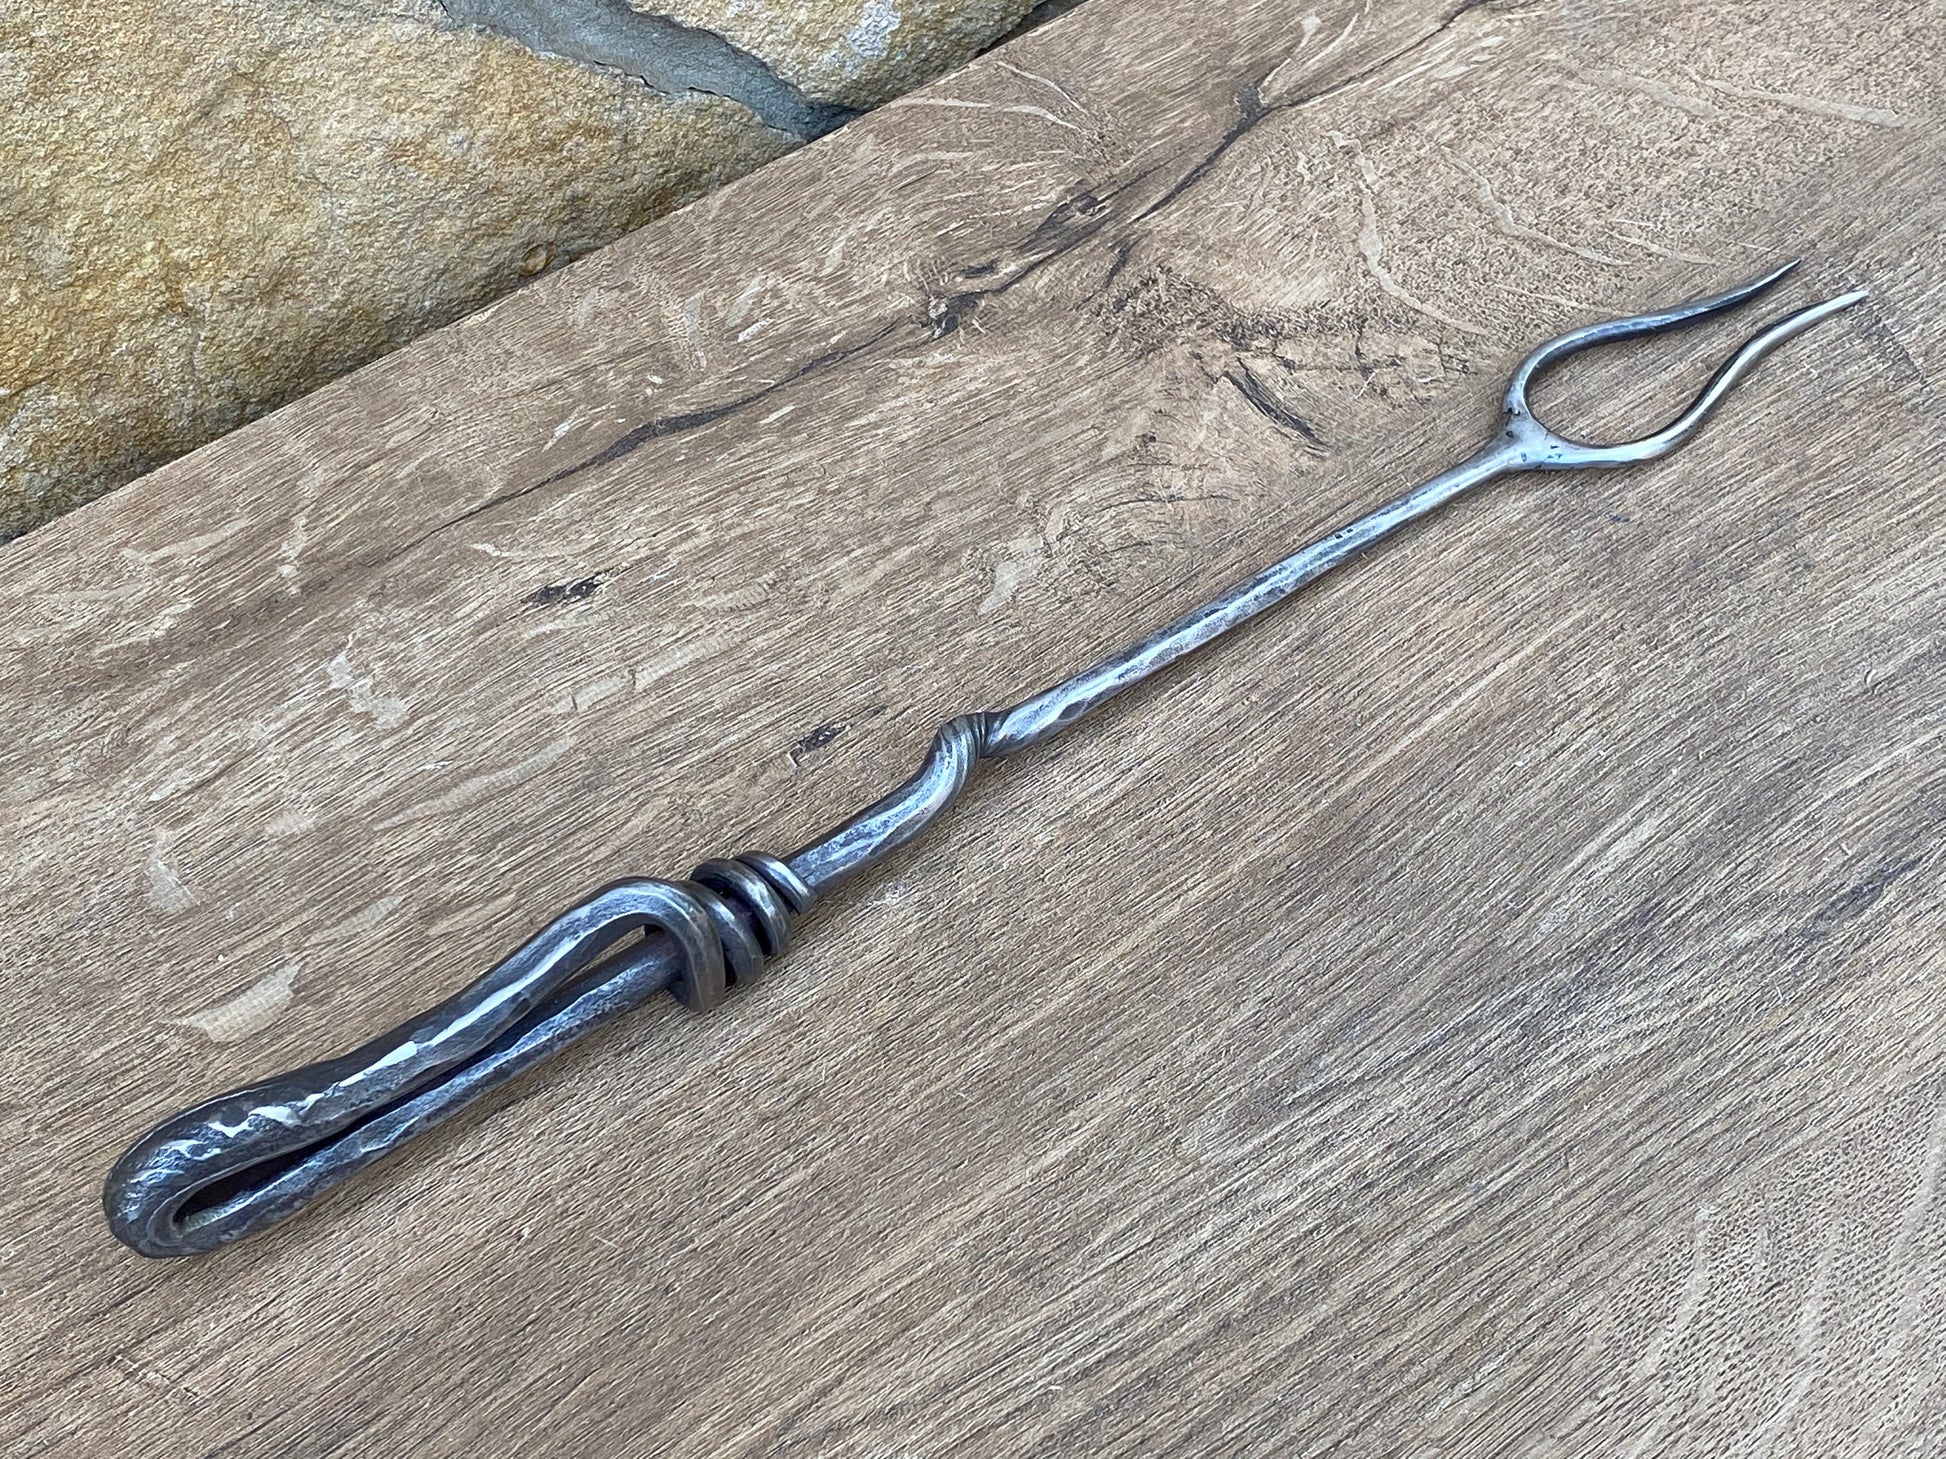 BBQ fork, grilling gift, medieval fork, barbeque gifts, medieval cutlery, iron gift, 6th anniversary gift, antique, vintage, gift for men